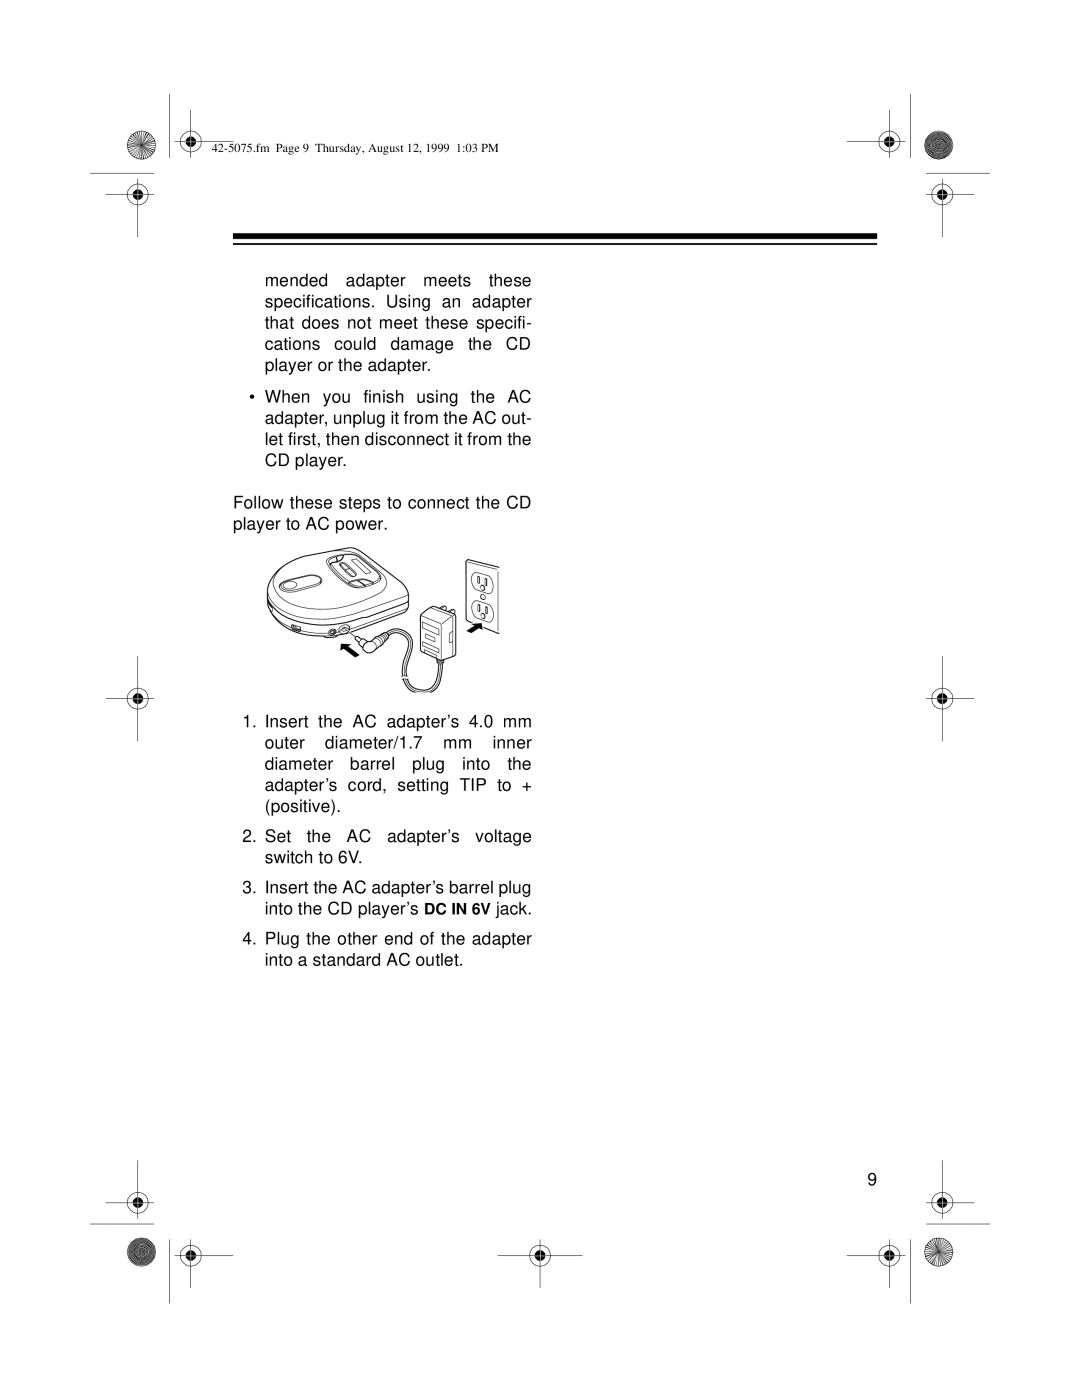 Optimus CD-3690 (42-5076), CD-3680 (42-5075) owner manual Set the AC adapter’s voltage switch to 